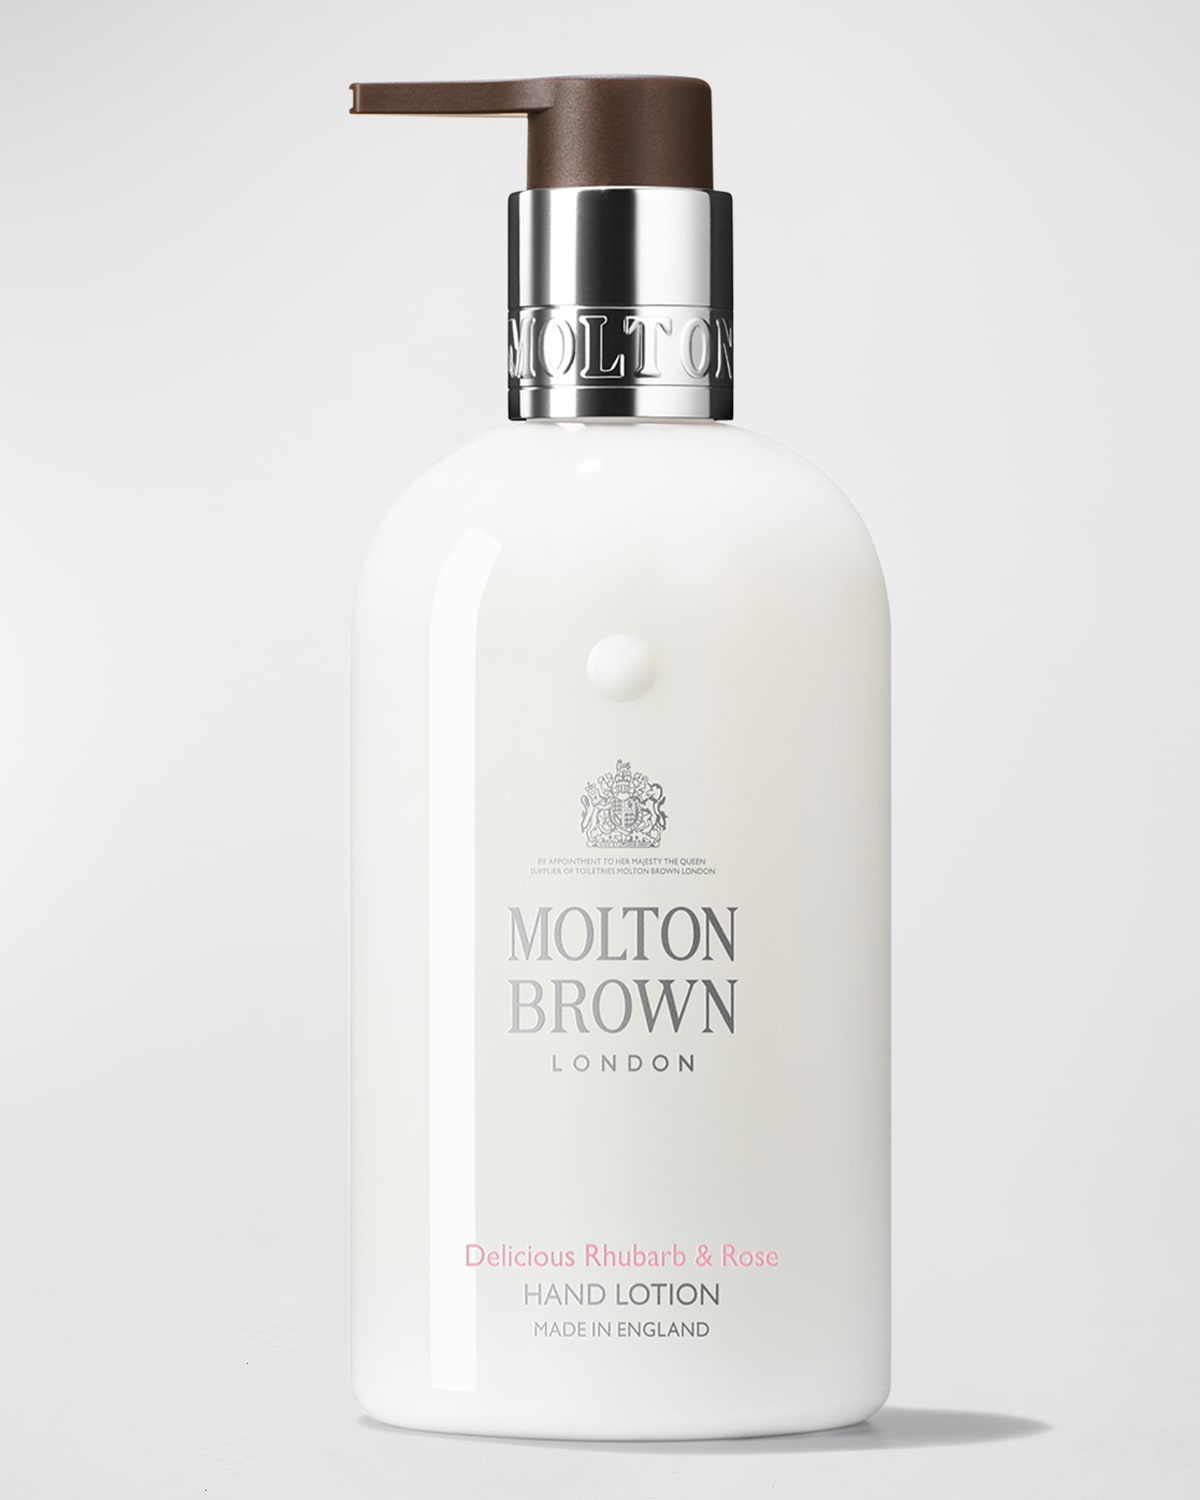 Delicious Rhubarb & Rose Hand Lotion, 10 oz.